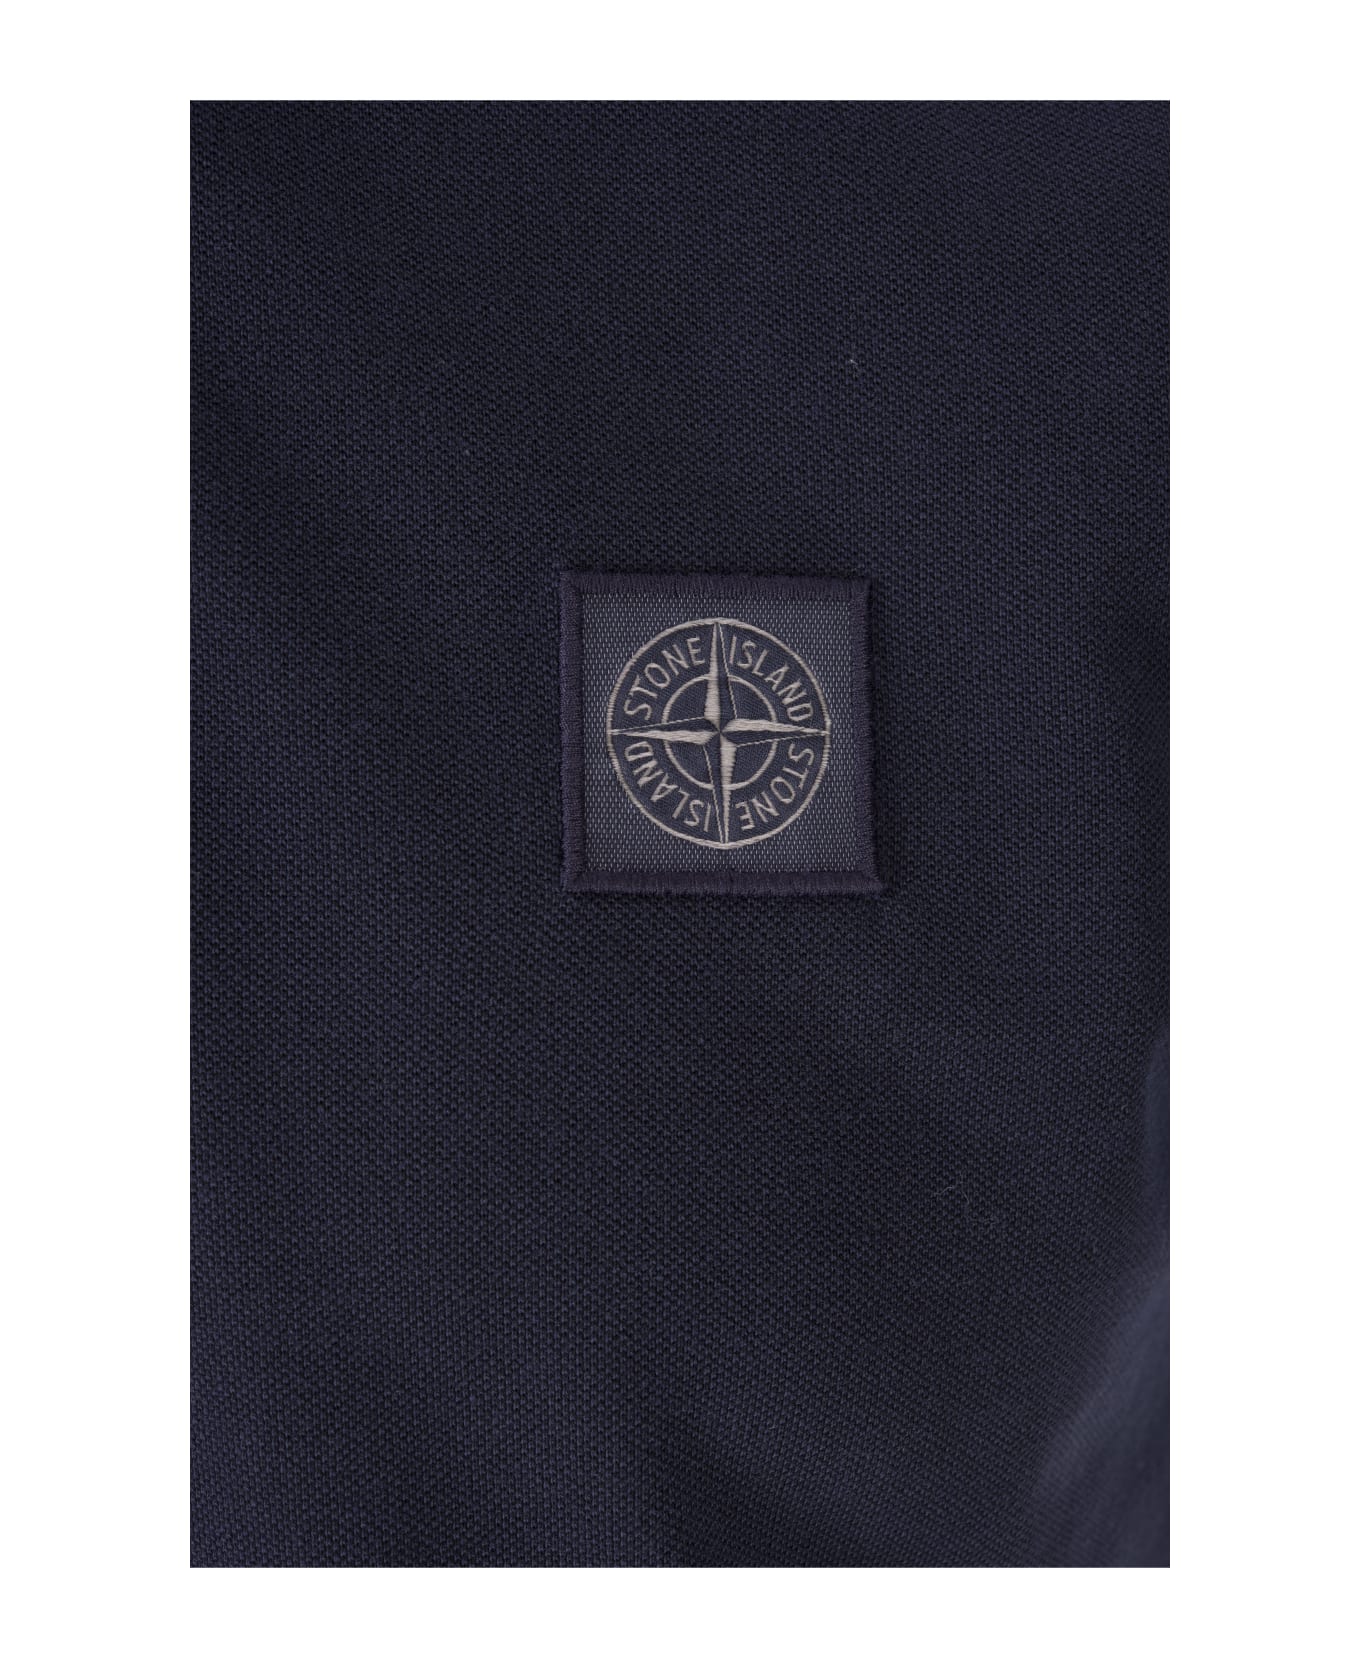 Stone Island Navy Blue Pigment Dyed Slim Fit Polo Shirt - Blue